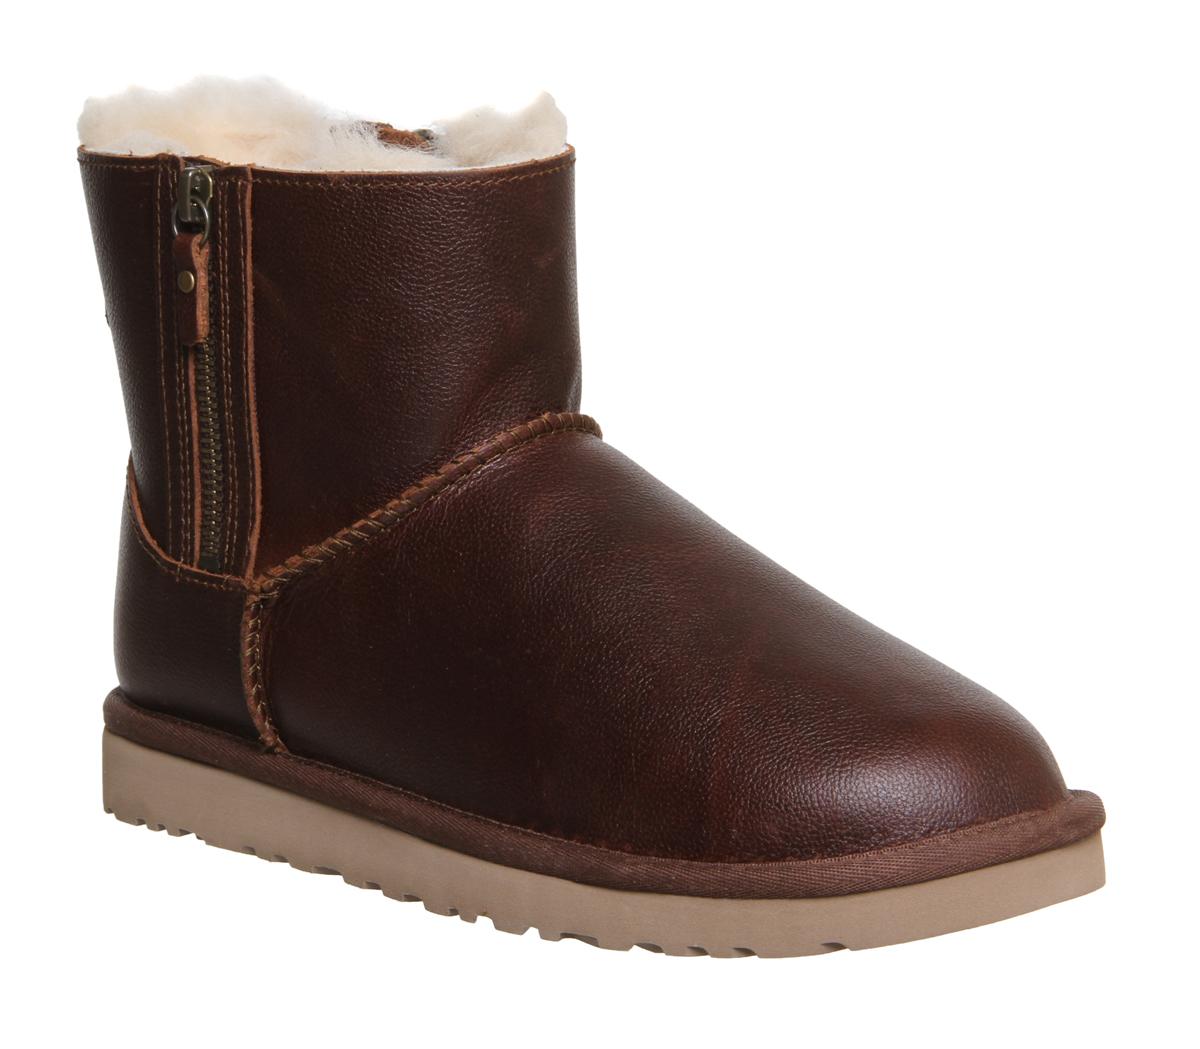 brown leather uggs with zipper